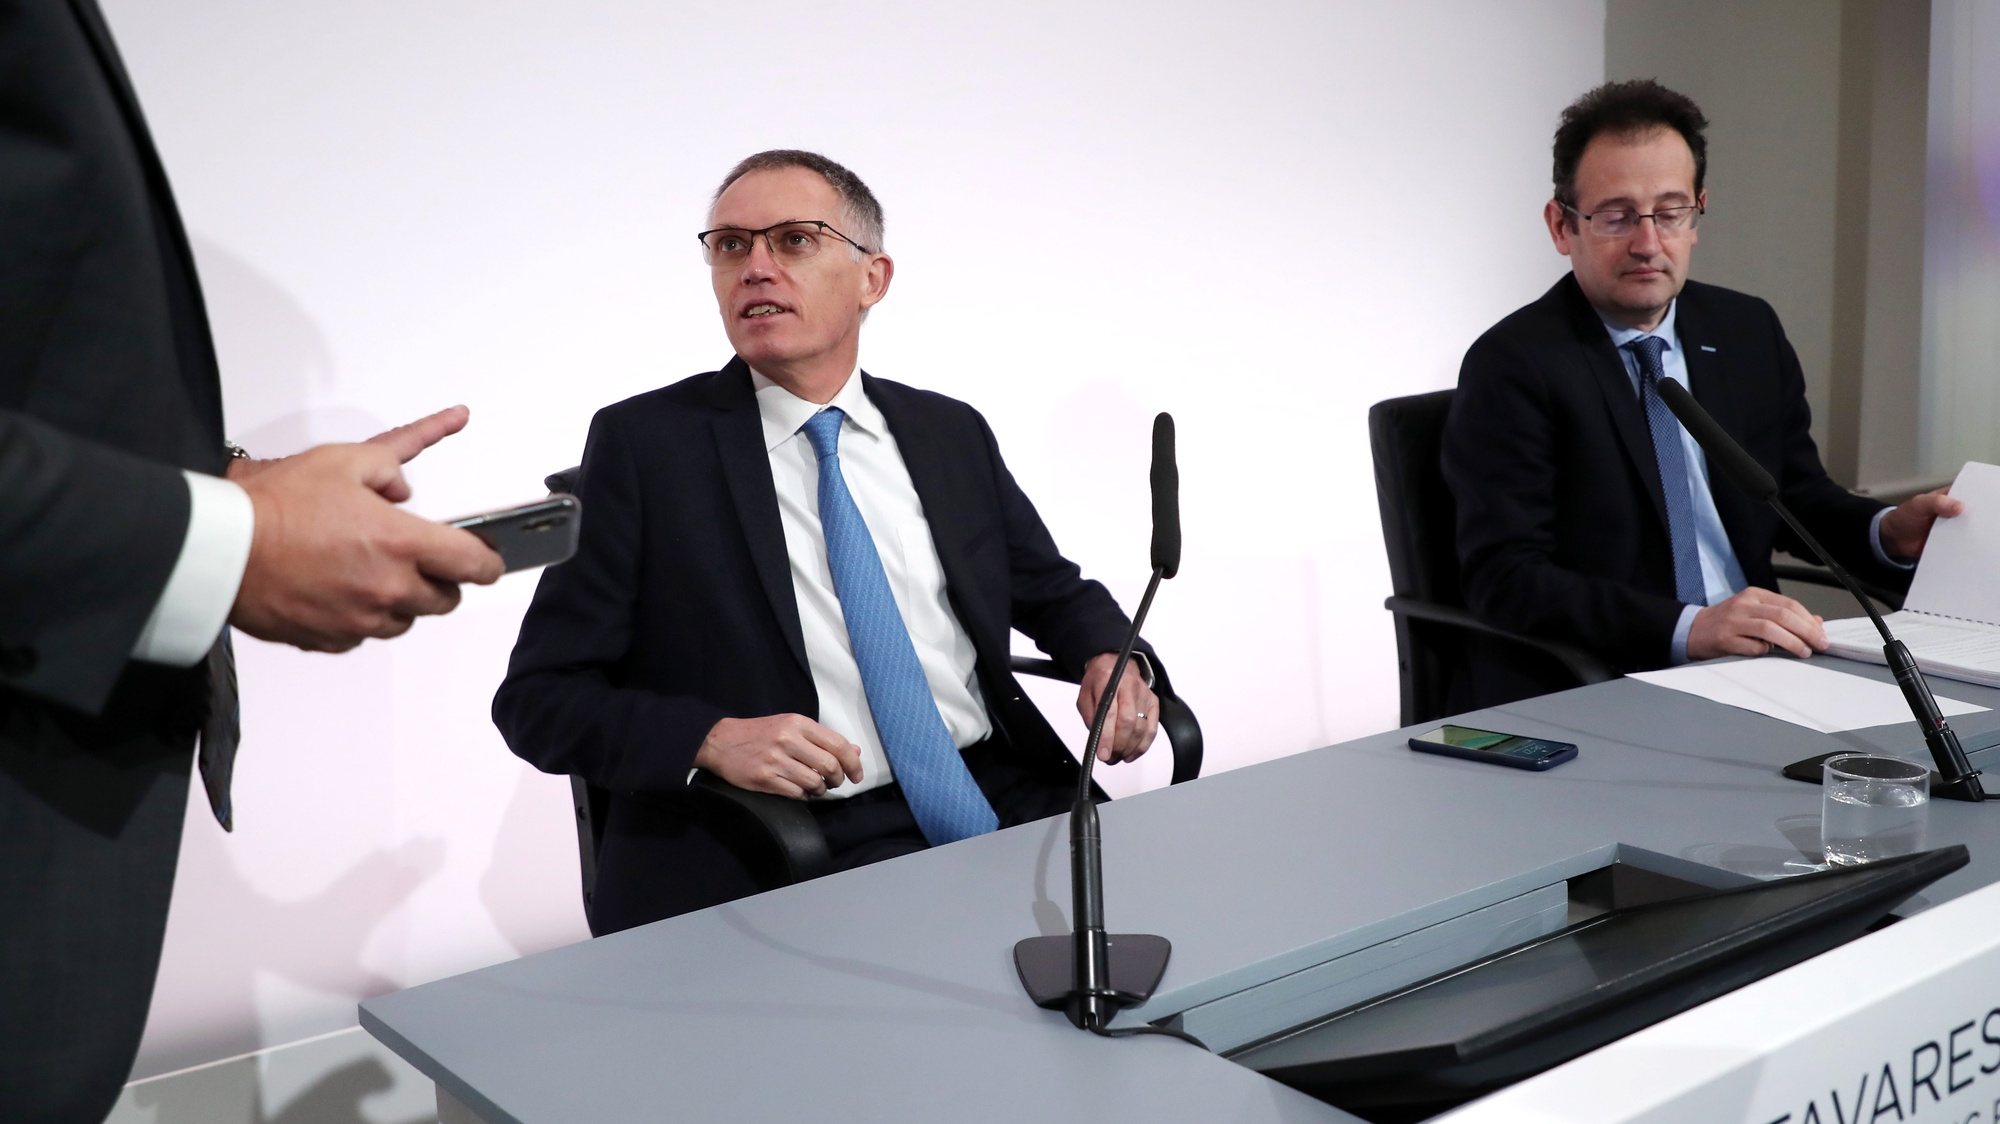 epa08248503 Groupe PSA CEO Carlos Tavares (L) and CFO Philippe de Rovira (R) attend a press conference to present the company&#039;s 2019 annual results, in Rueil-Malmaison, France, 26 February 2020. French car manufacturer PSA, owner of the brands Peugeot, Citroen, Opel and Vauxhall, reports a profit of 3.2 billion euros for 2019.  EPA/CHRISTOPHE PETIT TESSON *** Local Caption *** 55013989